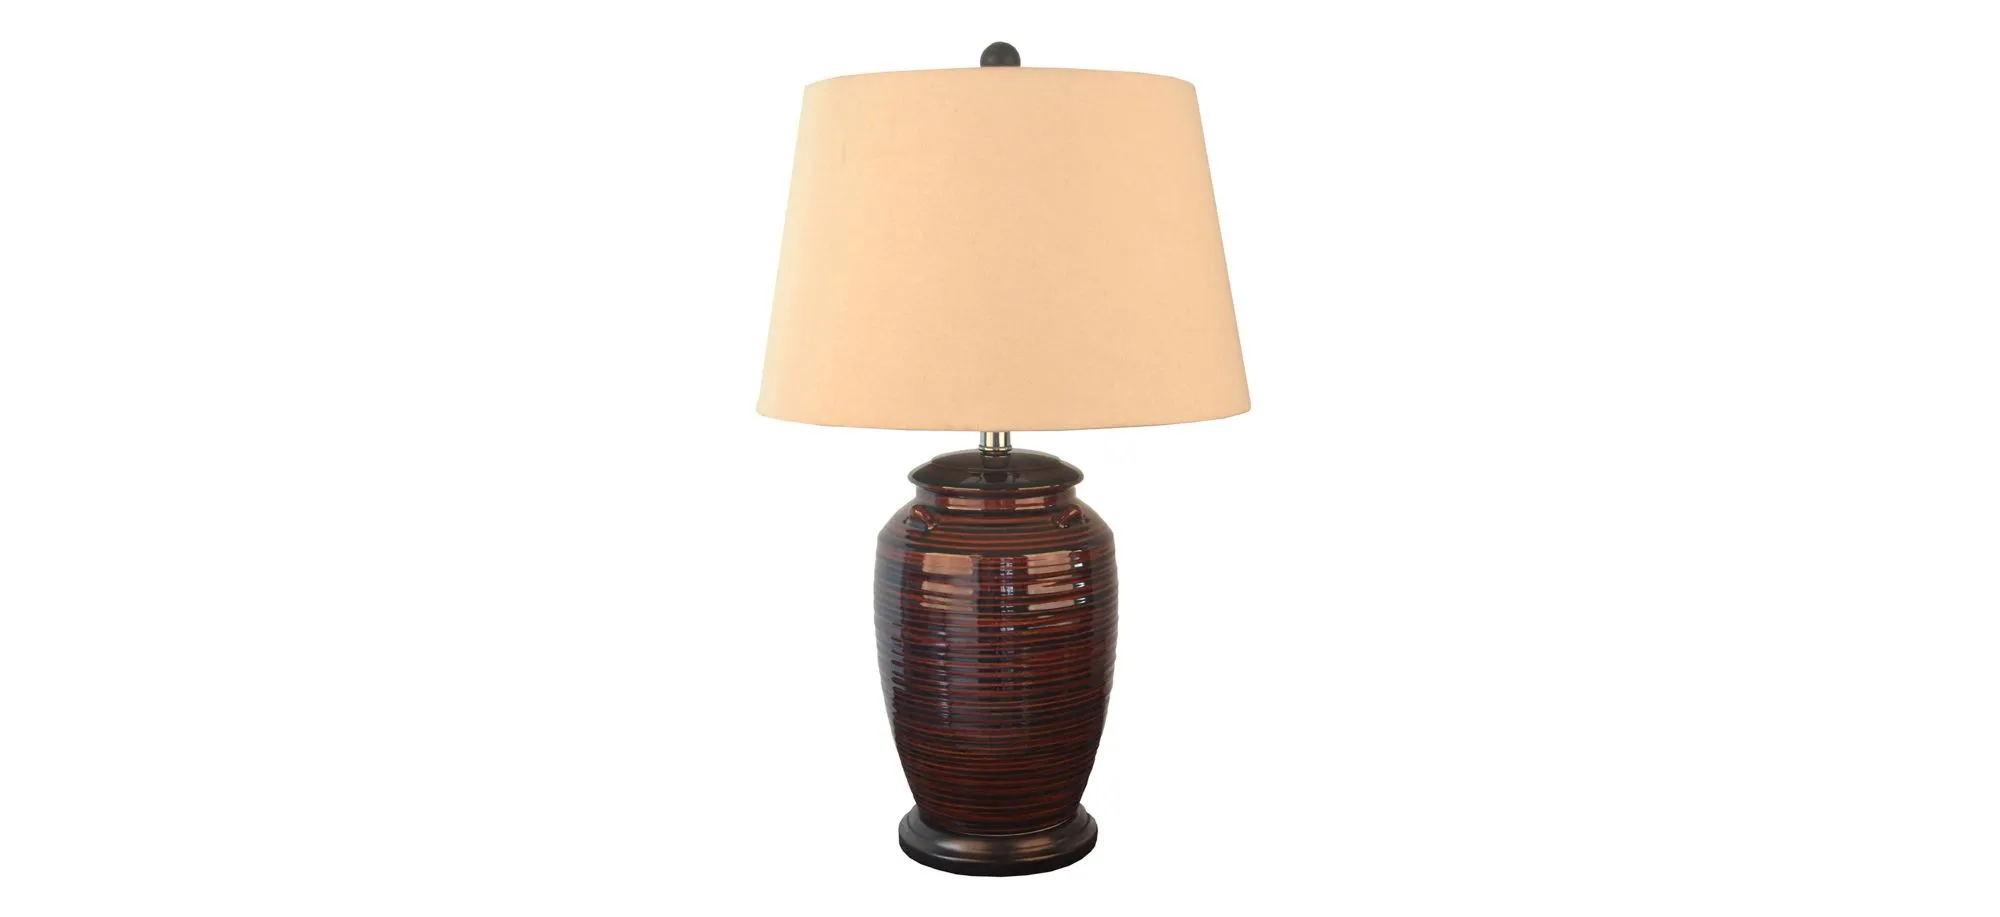 Murakami Table Lamp in Dark Red and Brown by L&B Home Decor Inc